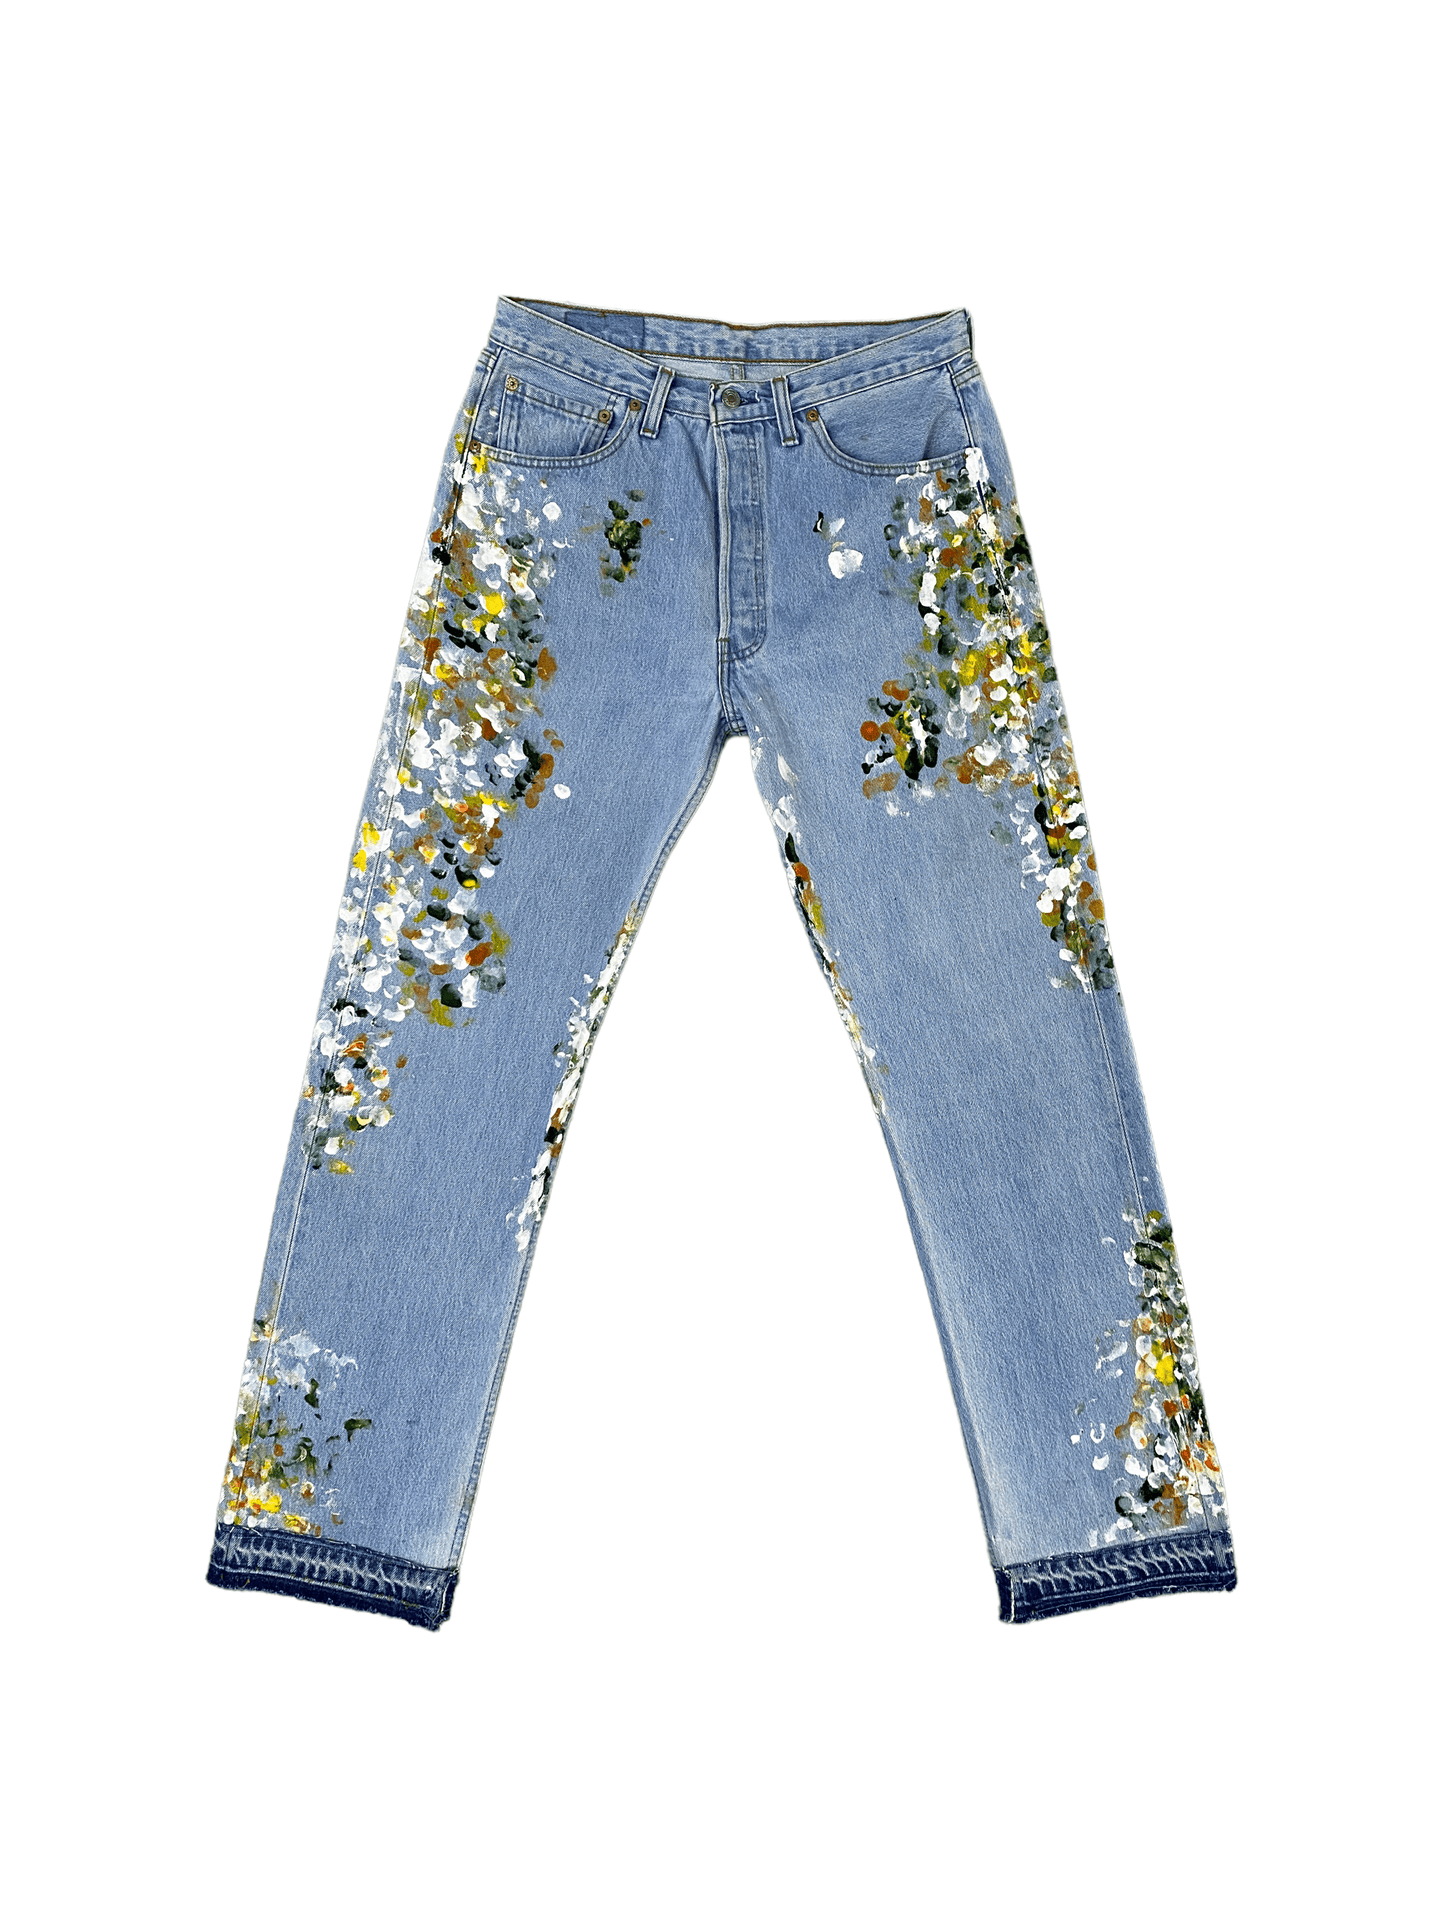 MULTI PAINTED JEANS V1 - Nicolò Puccini